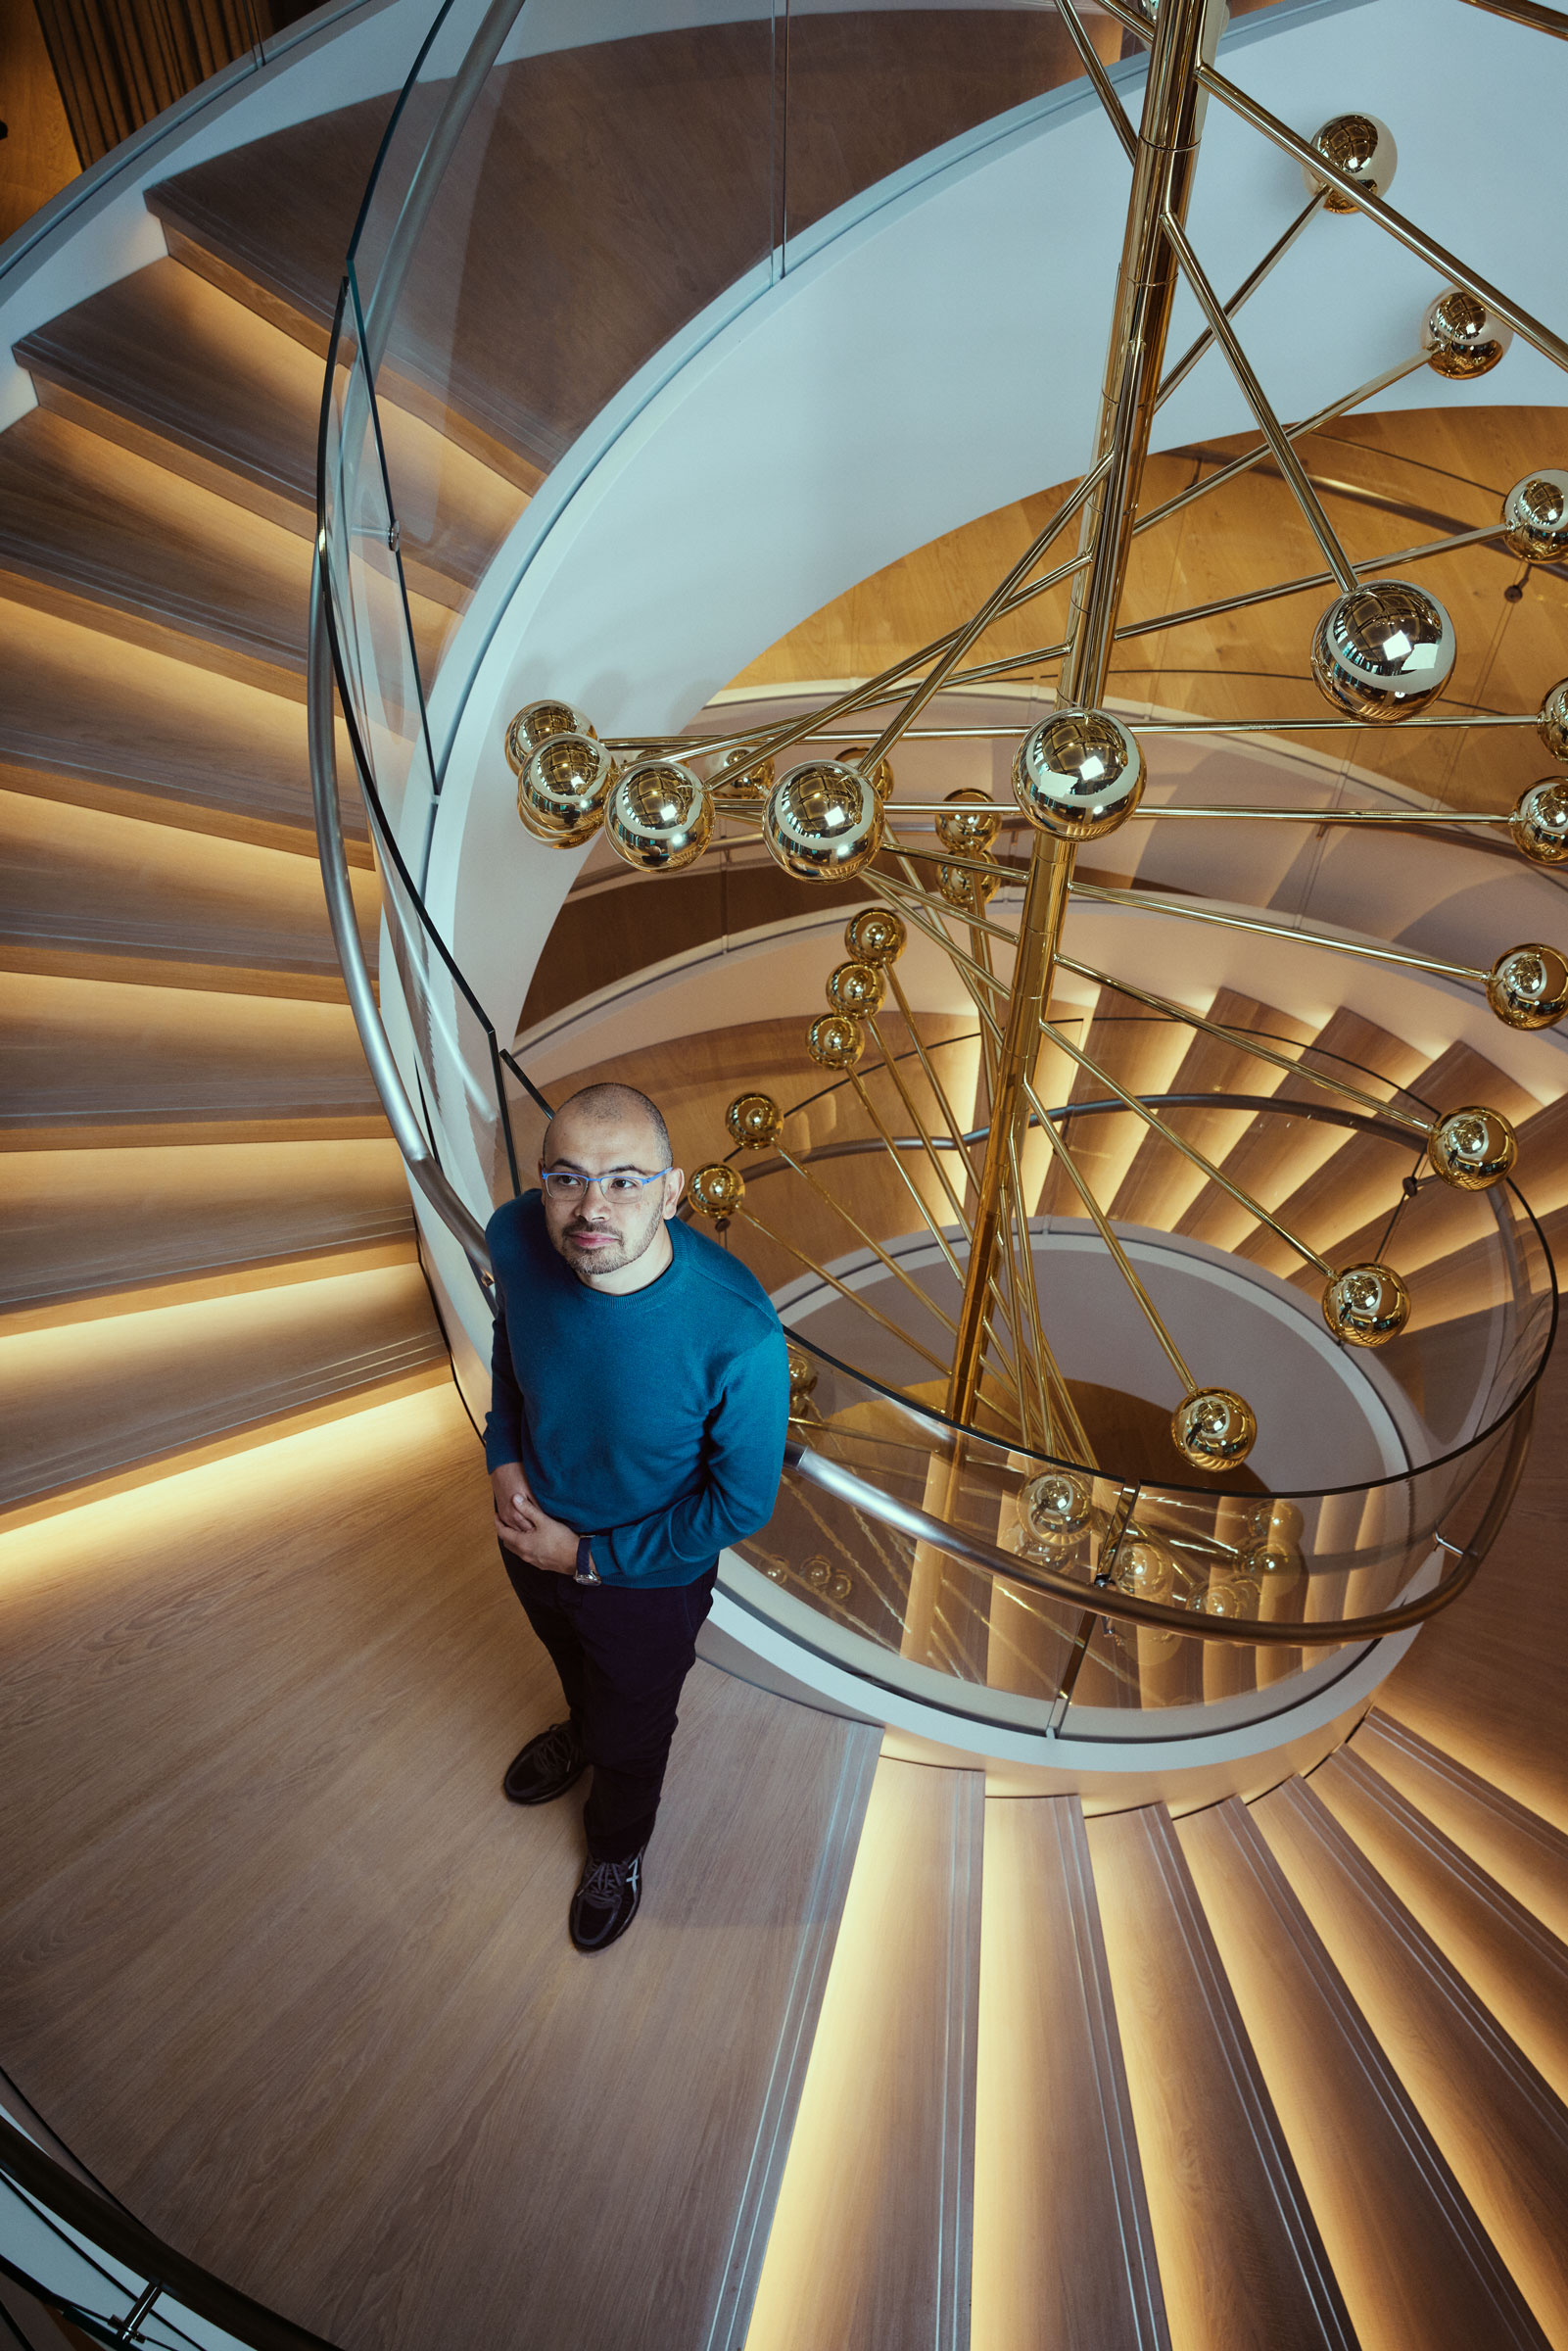 Demis Hassabis by the <em>Helicase</em>—a sculpture that uses DNA’s helix shape as a symbol of human endeavor and the pursuit of knowledge—at DeepMind’s headquarters in London on Nov. 3, 2022 (James Day for TIME)